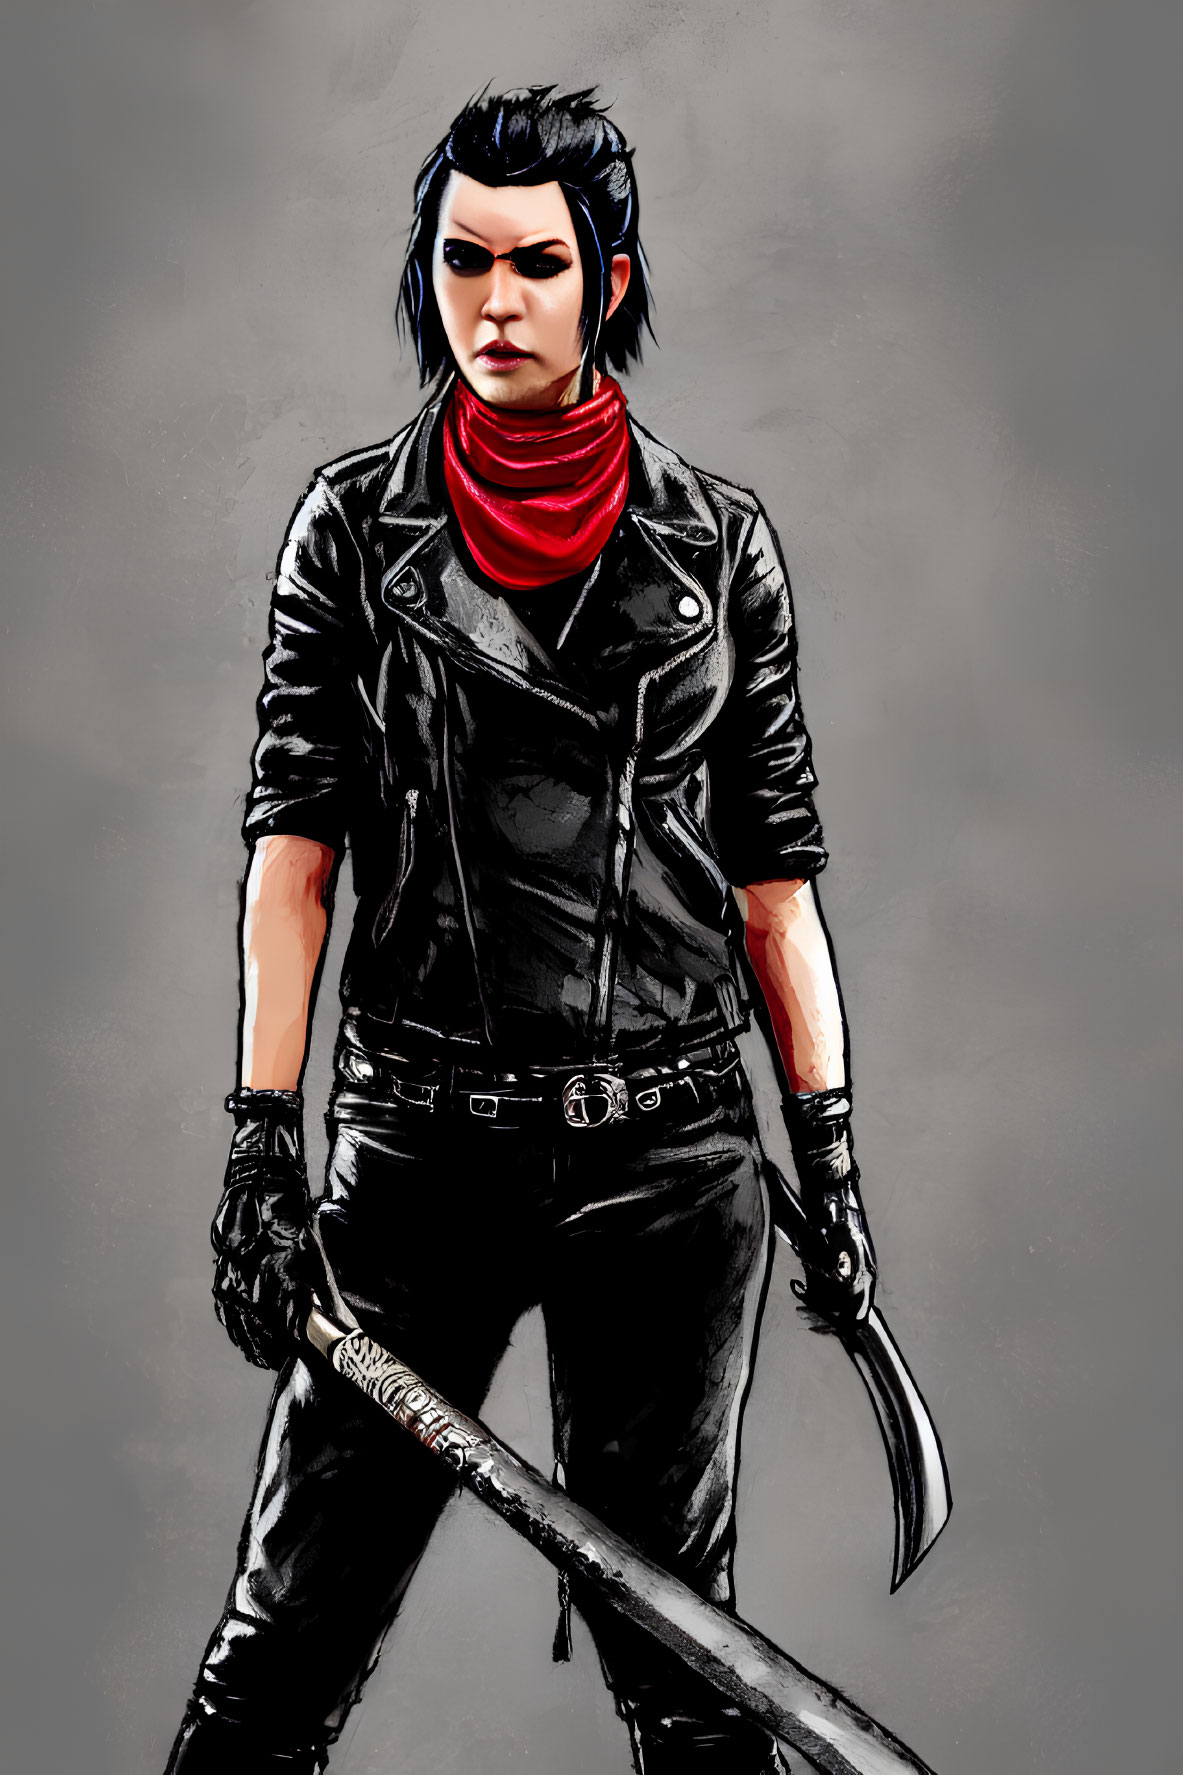 Character with blue-black hair in leather jacket and red scarf holding scythe weapon